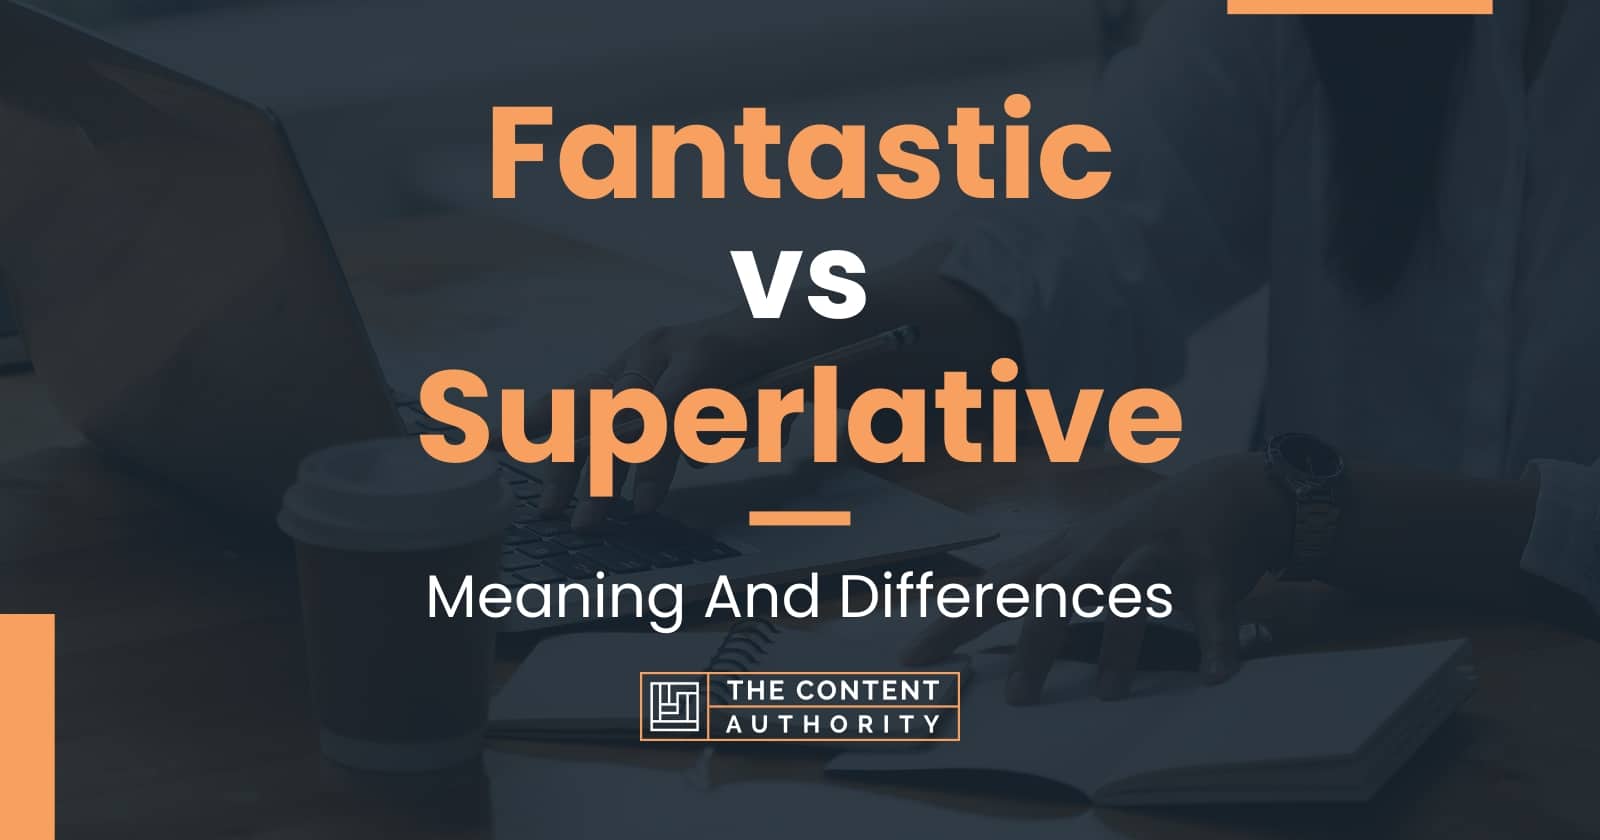 Fantastic vs Superlative: Meaning And Differences